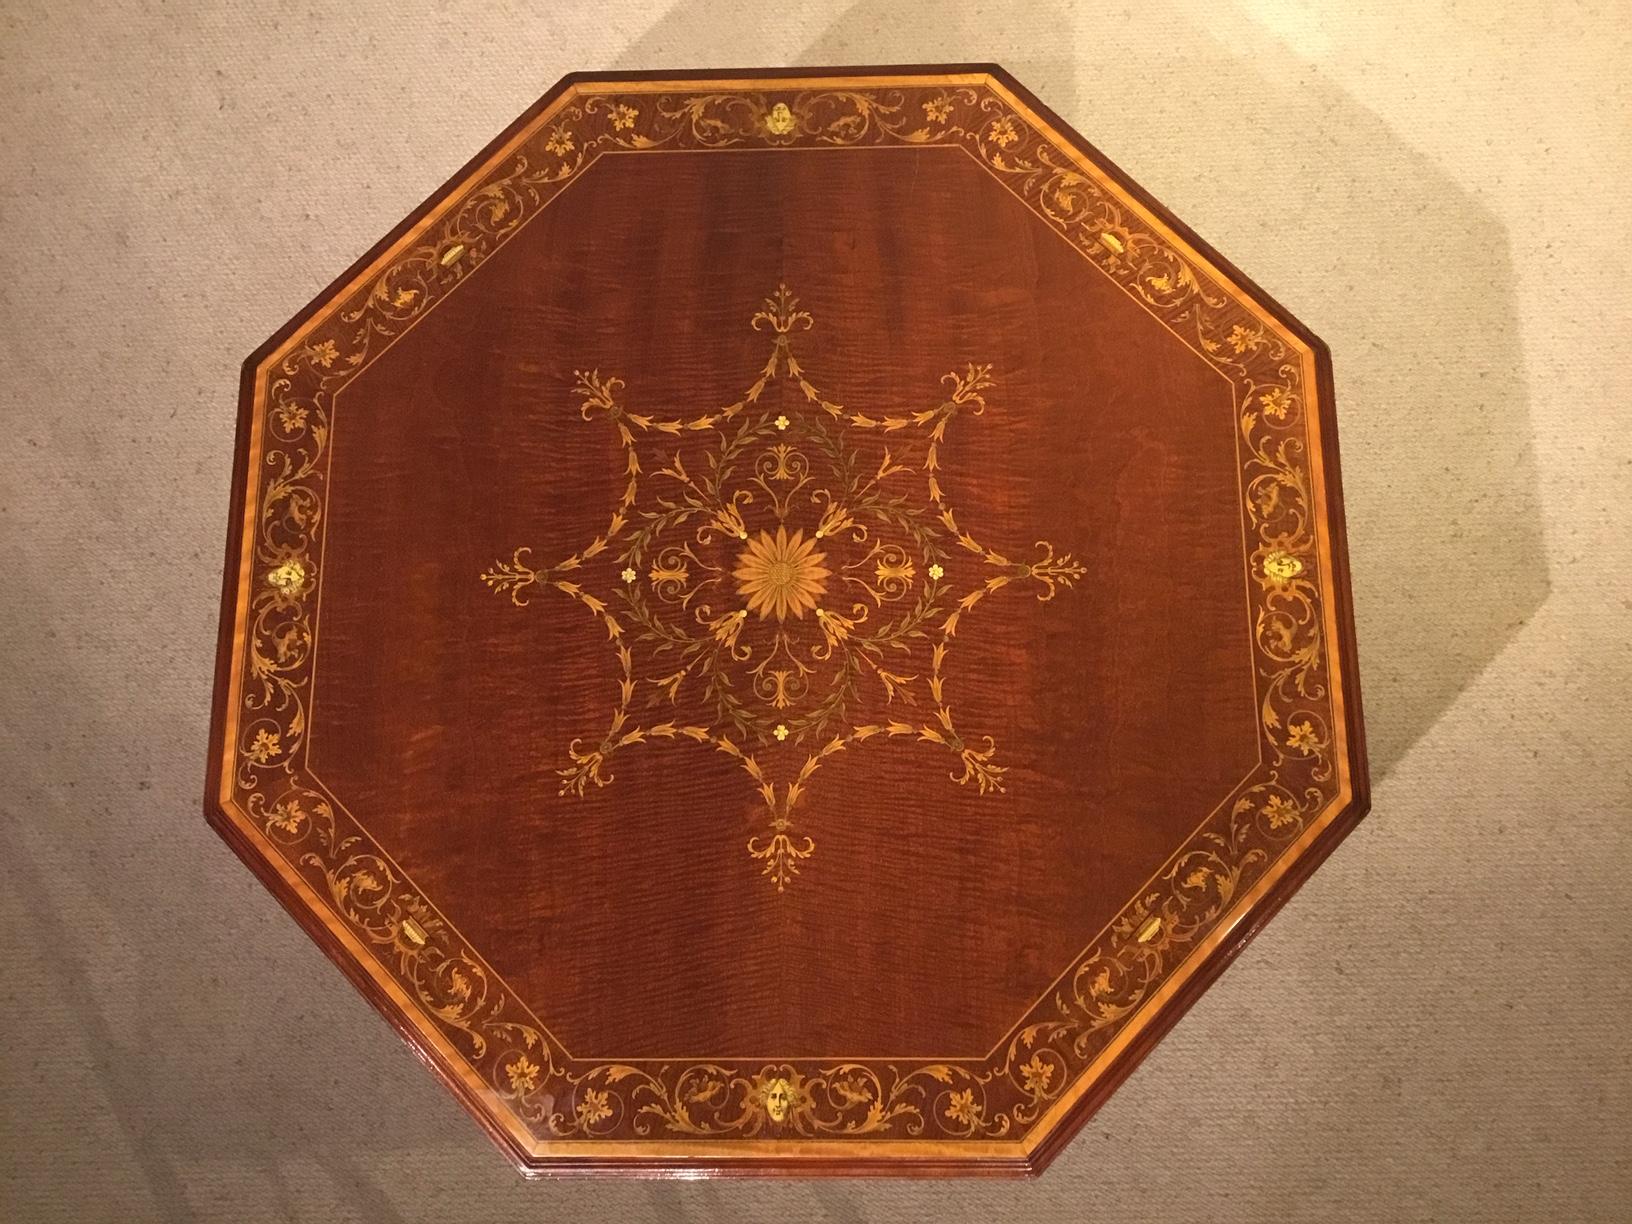 A fine quality Edwardian period octagonal marquetry inlaid table by Edwards & Roberts of London. Having an octagonal top with a superb marquetry and pen-work central panel with further marquetry and pen-work griffins etc to the border. Supported on